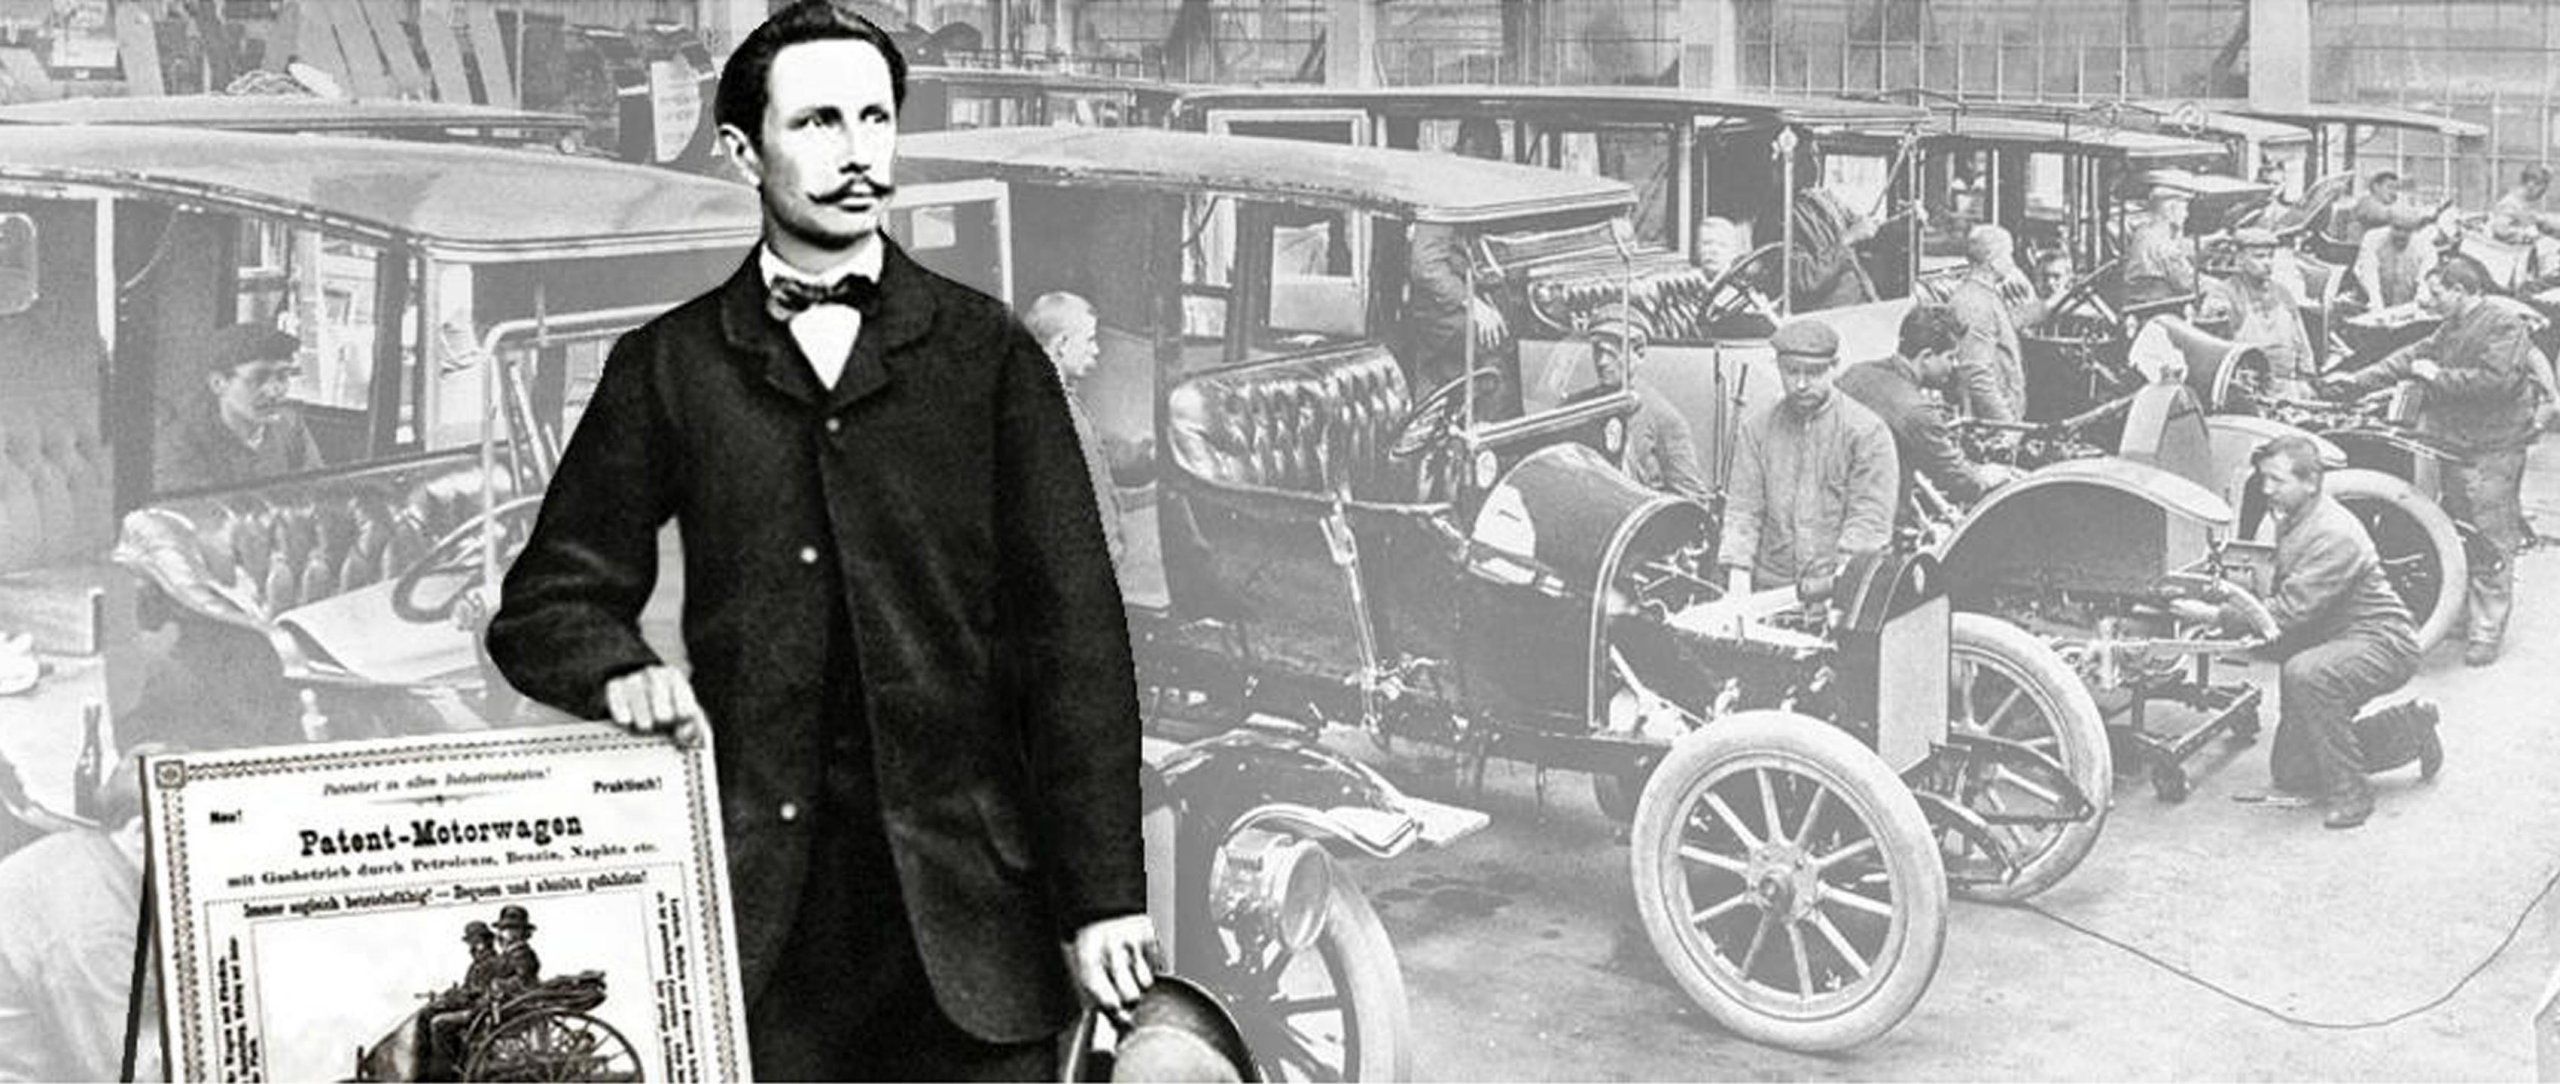 Daimler Reitwagen- The Engine Was Patented on April 3, 1885